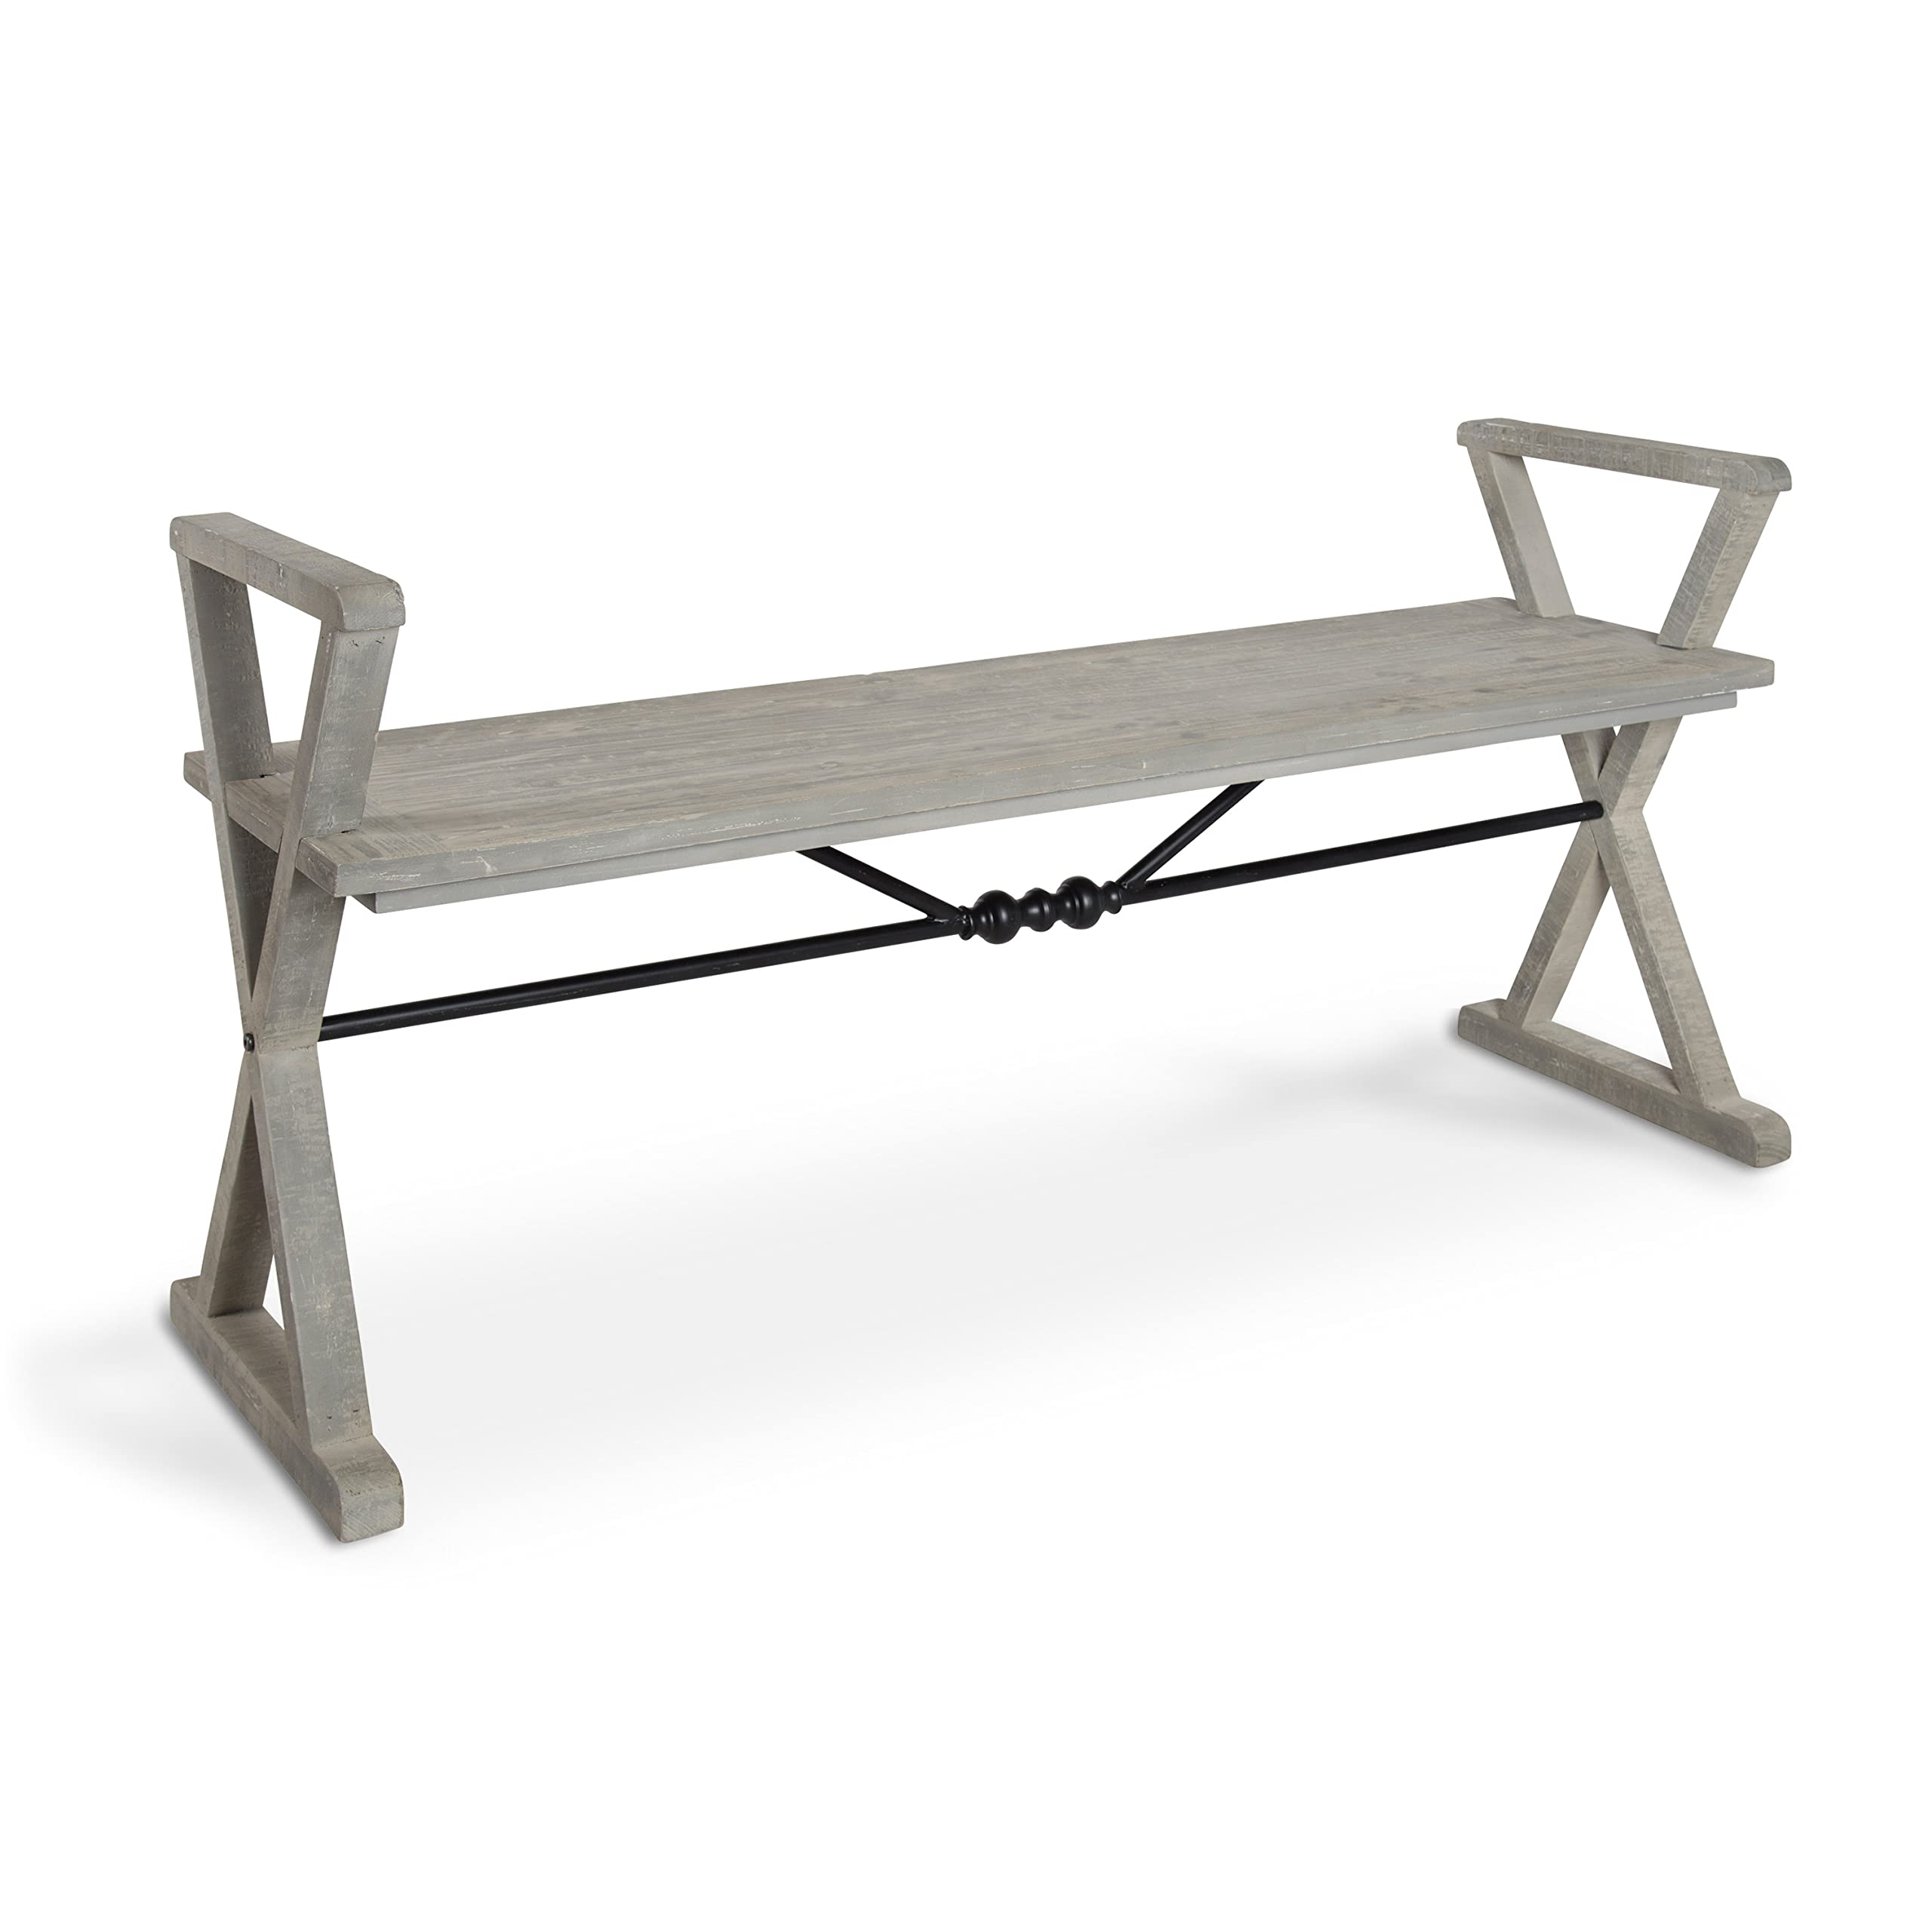 Kate And Laurel Travere Wood Bench, Rustic Gray Finish With Black Metal Support Bar